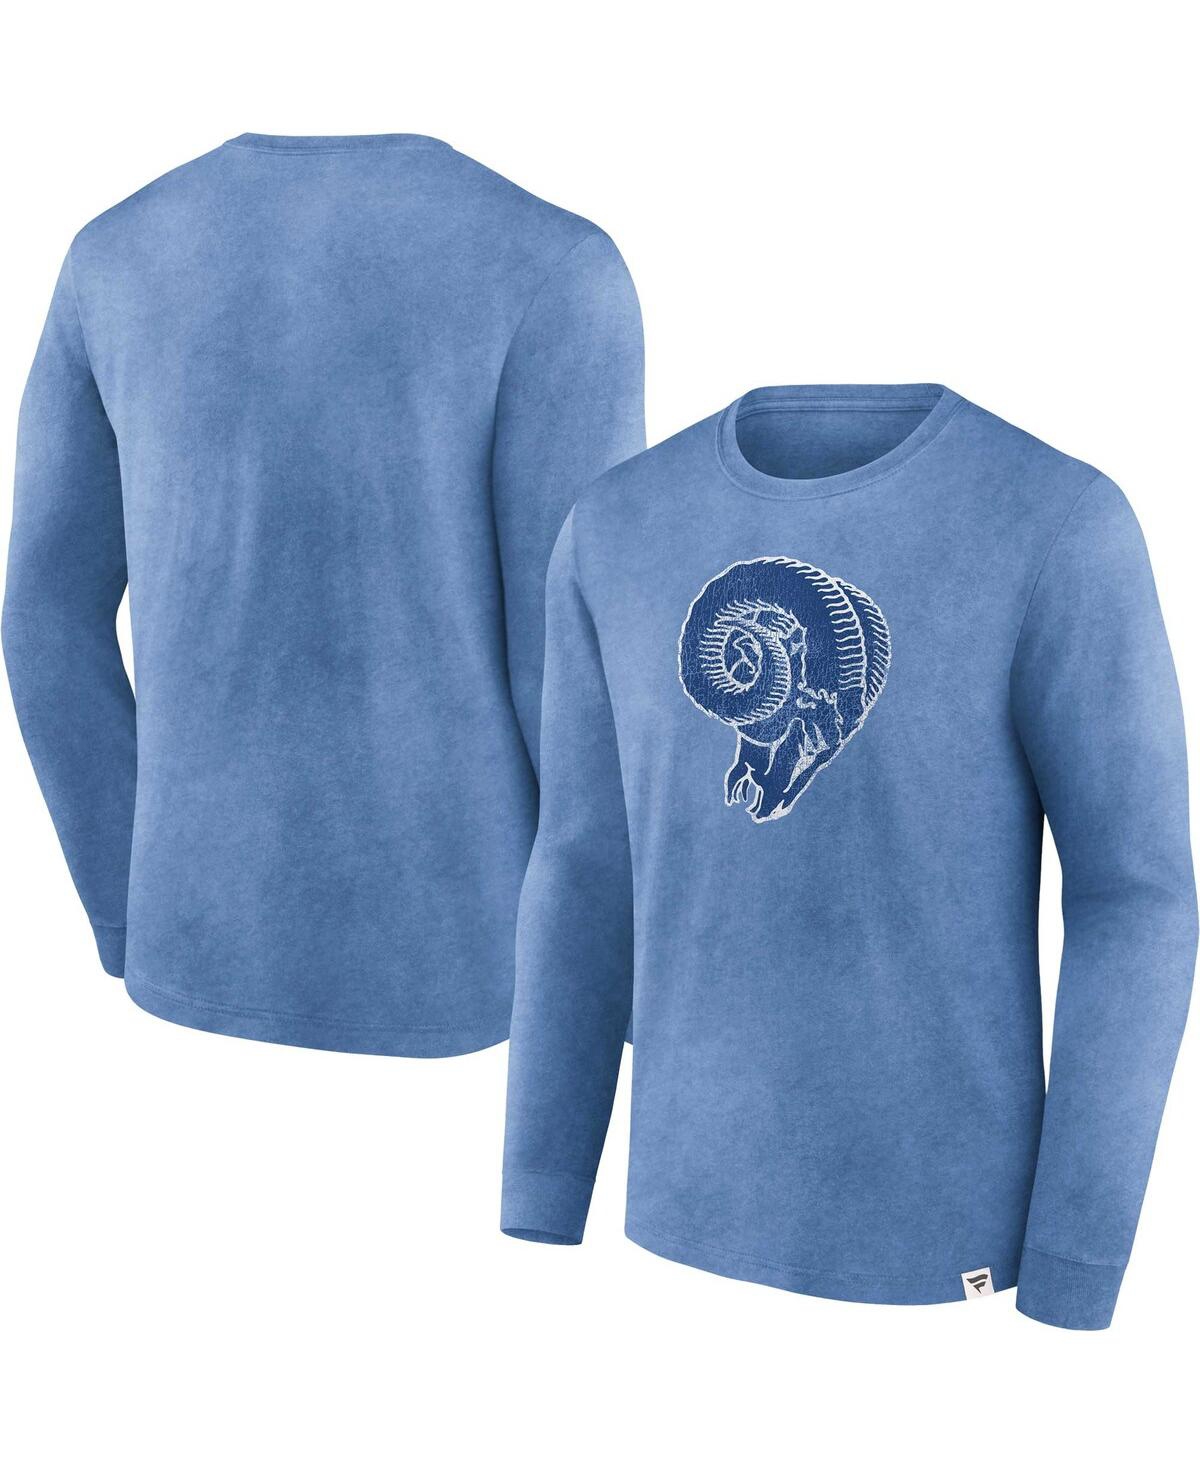 Fanatics Men's  Heather Royal Distressed Los Angeles Rams Washed Primary Long Sleeve T-shirt